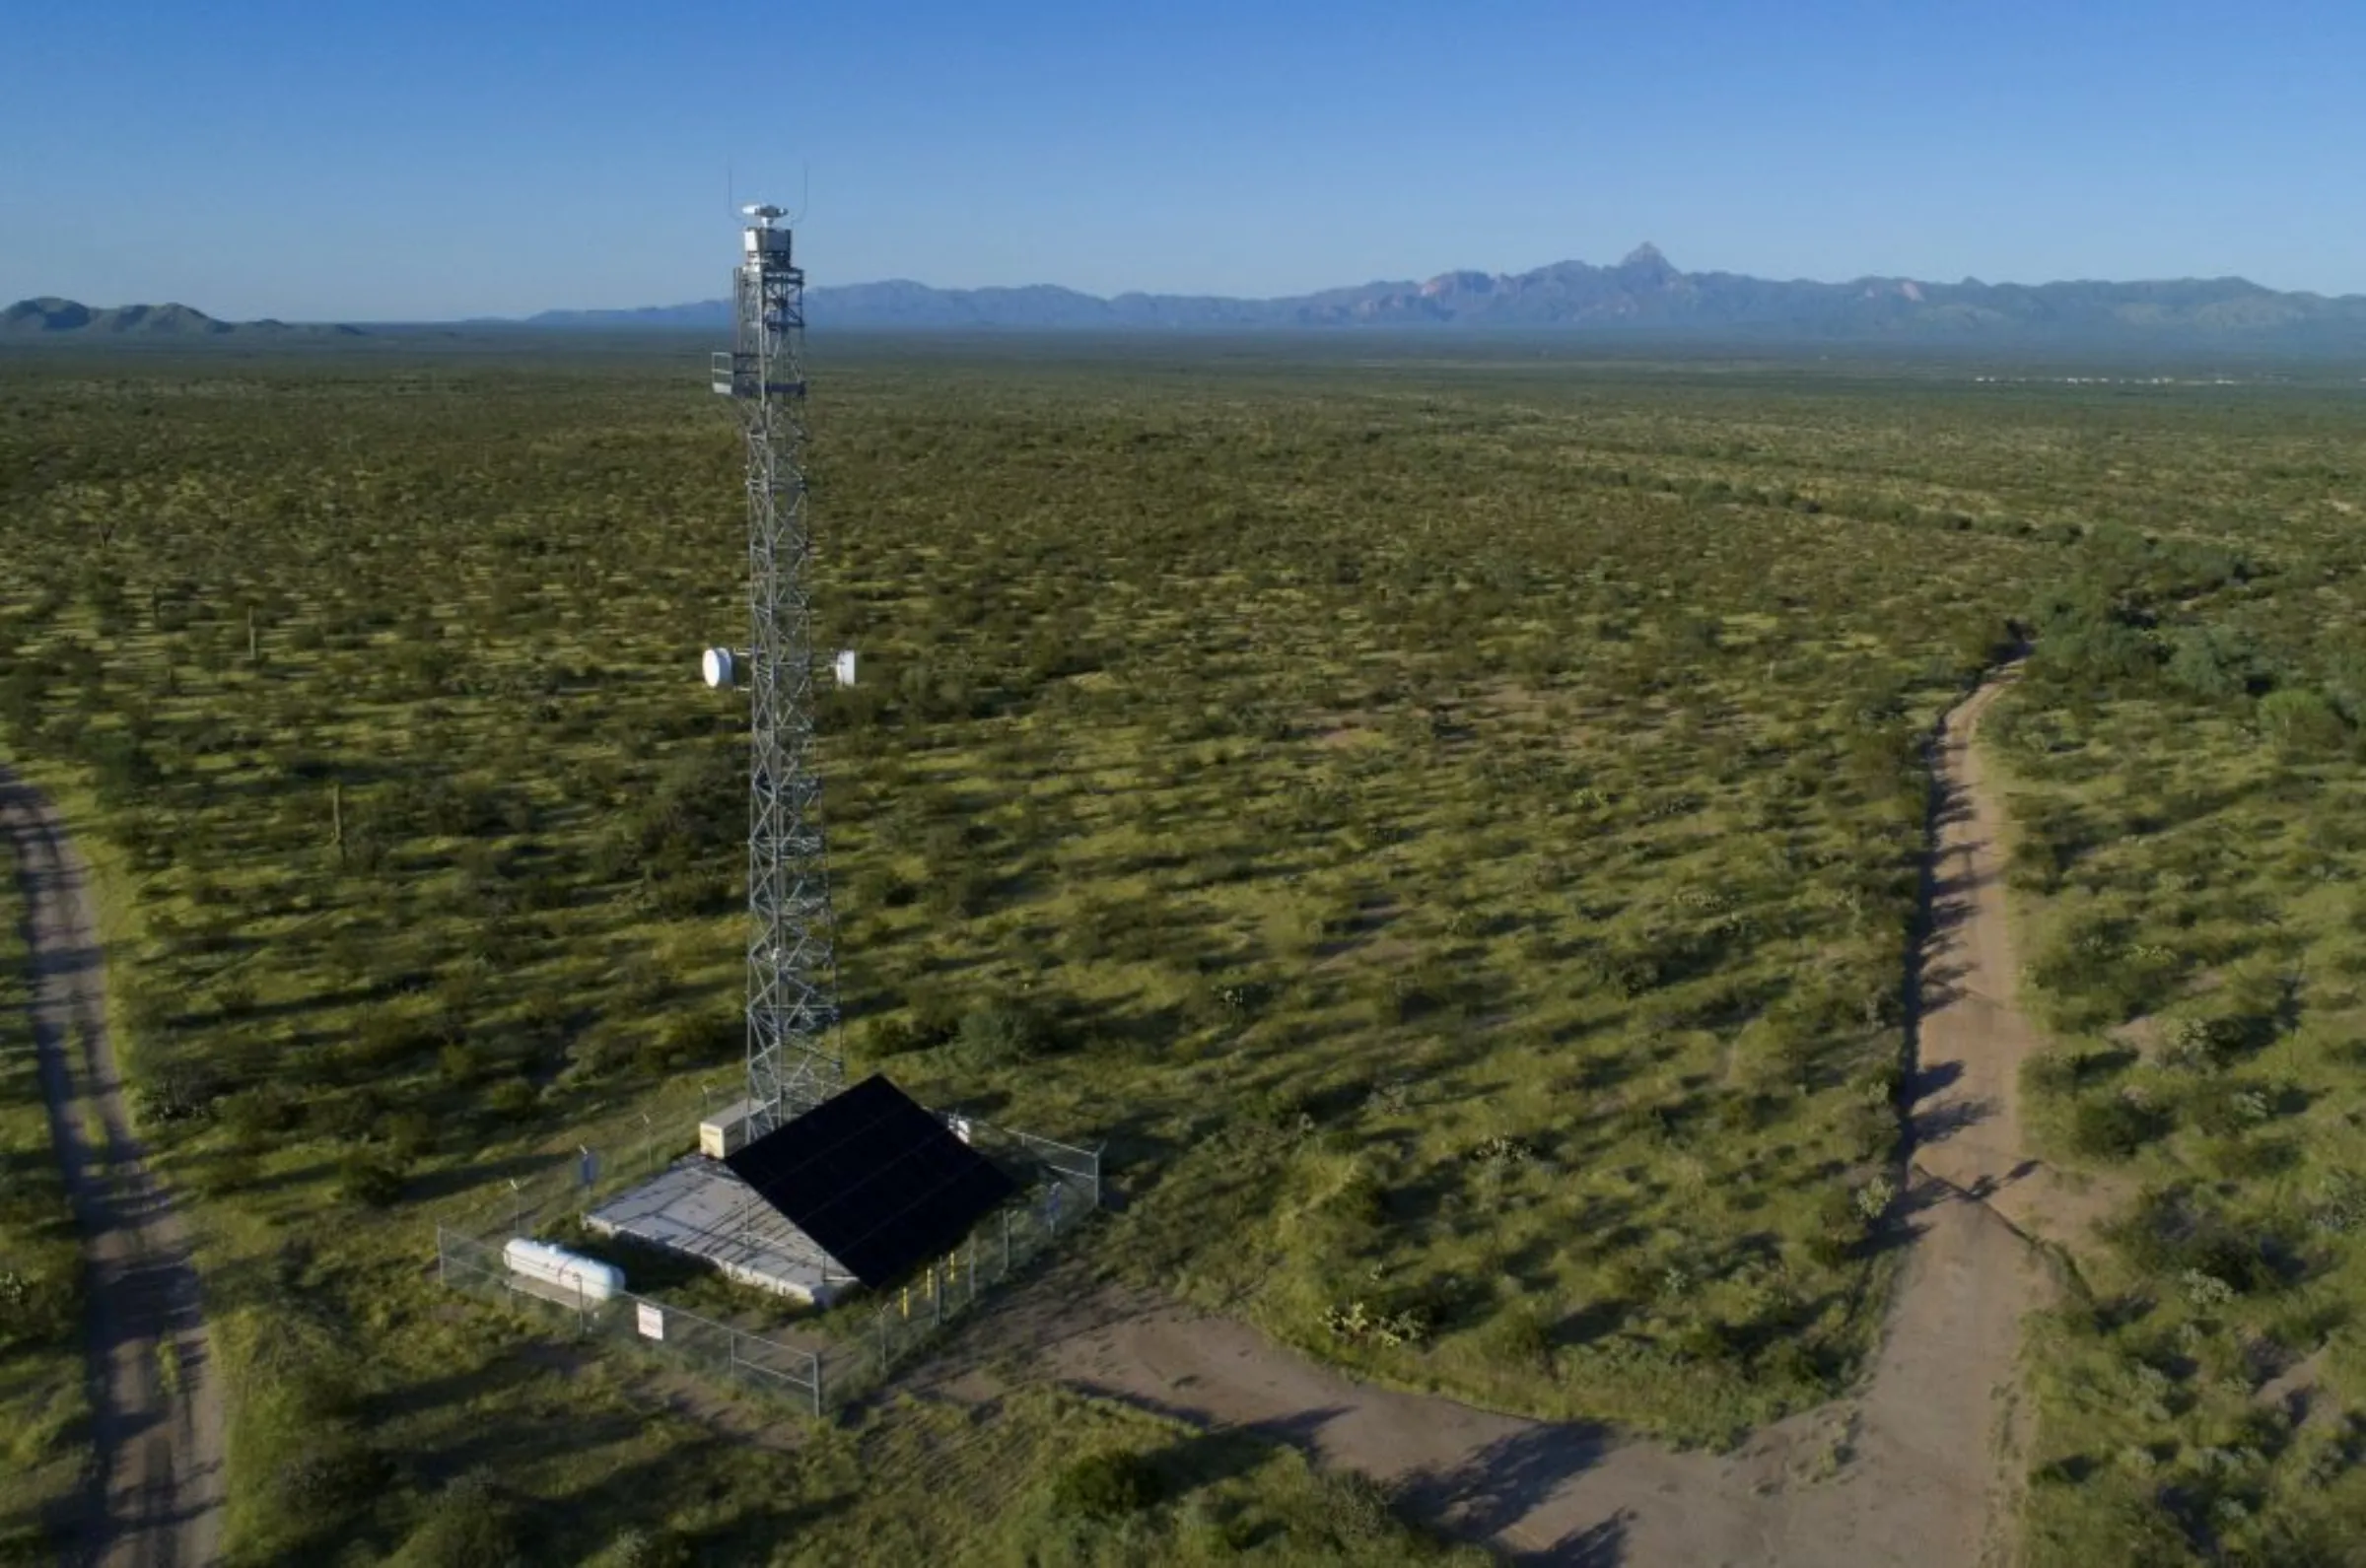 An integrated fixed tower (IFT) surveils the desert near the U.S./Mexico border on Tohono O’odham Nation lands, Arizona, U.S., August 31, 2022